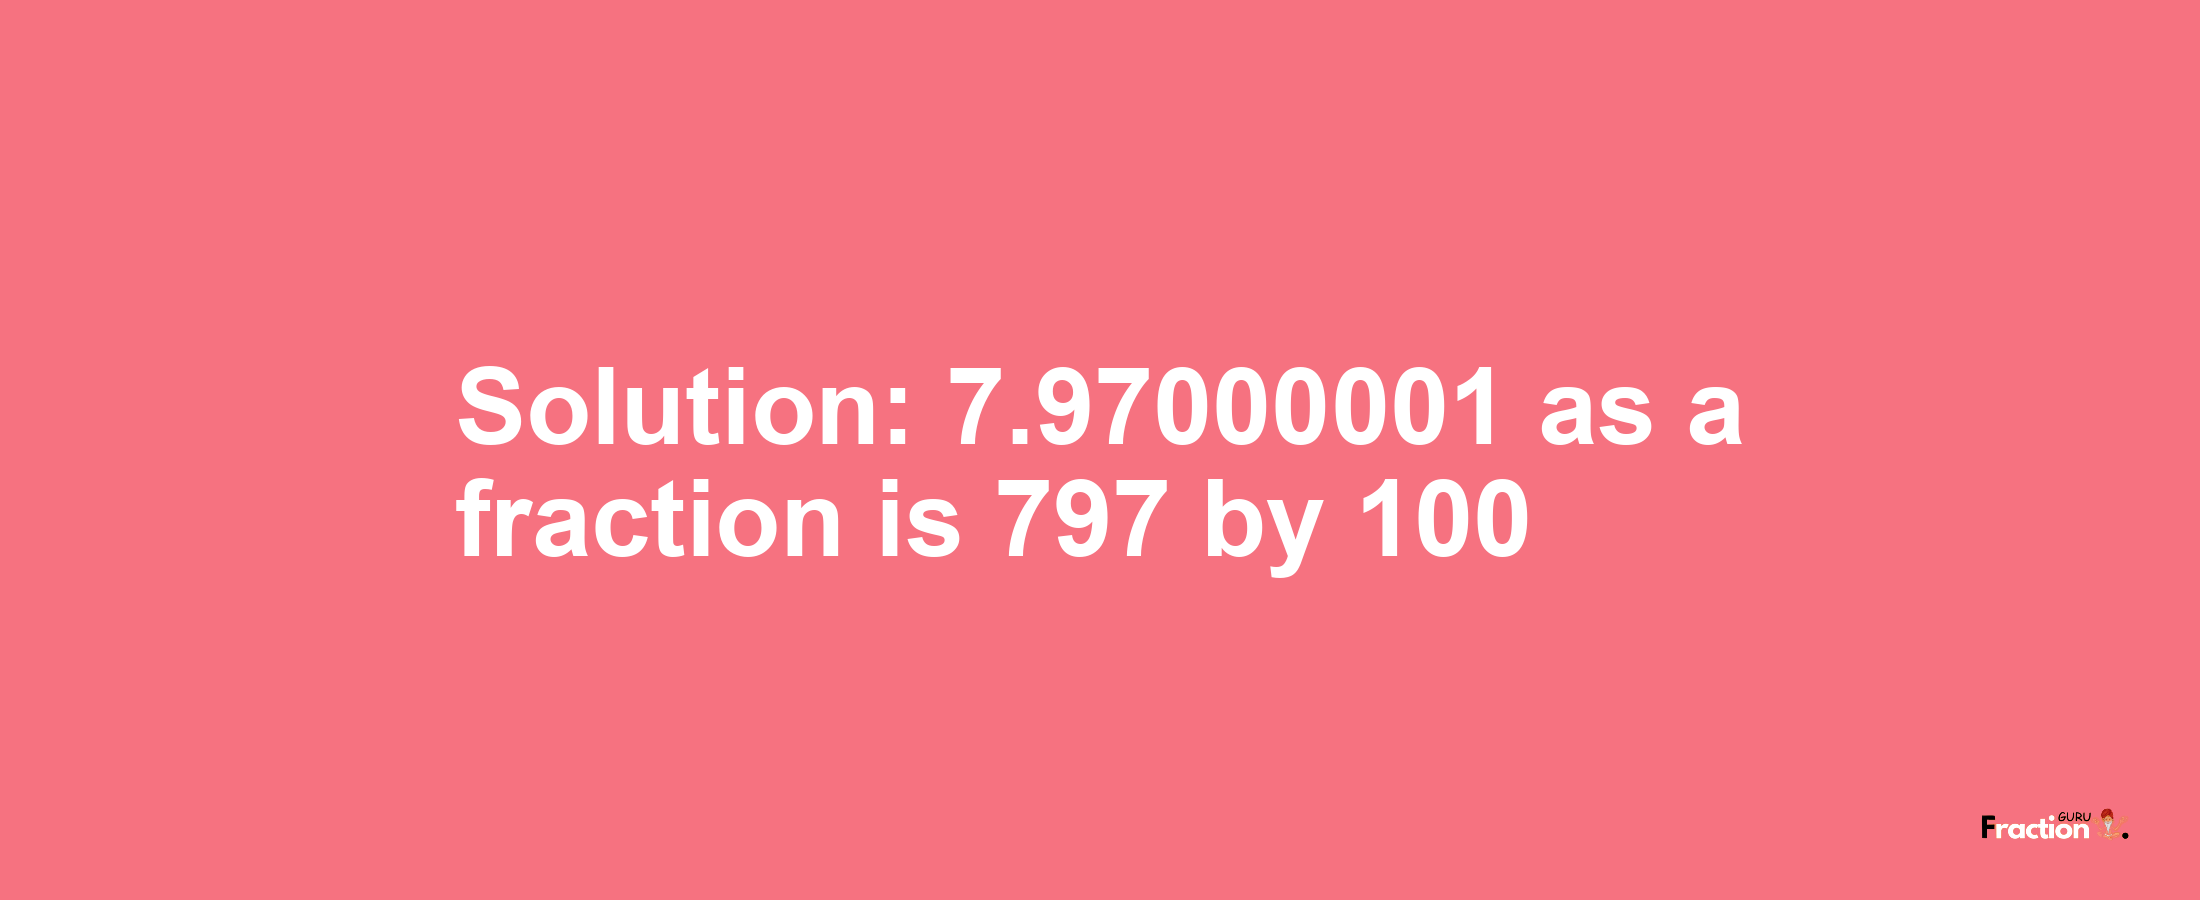 Solution:7.97000001 as a fraction is 797/100